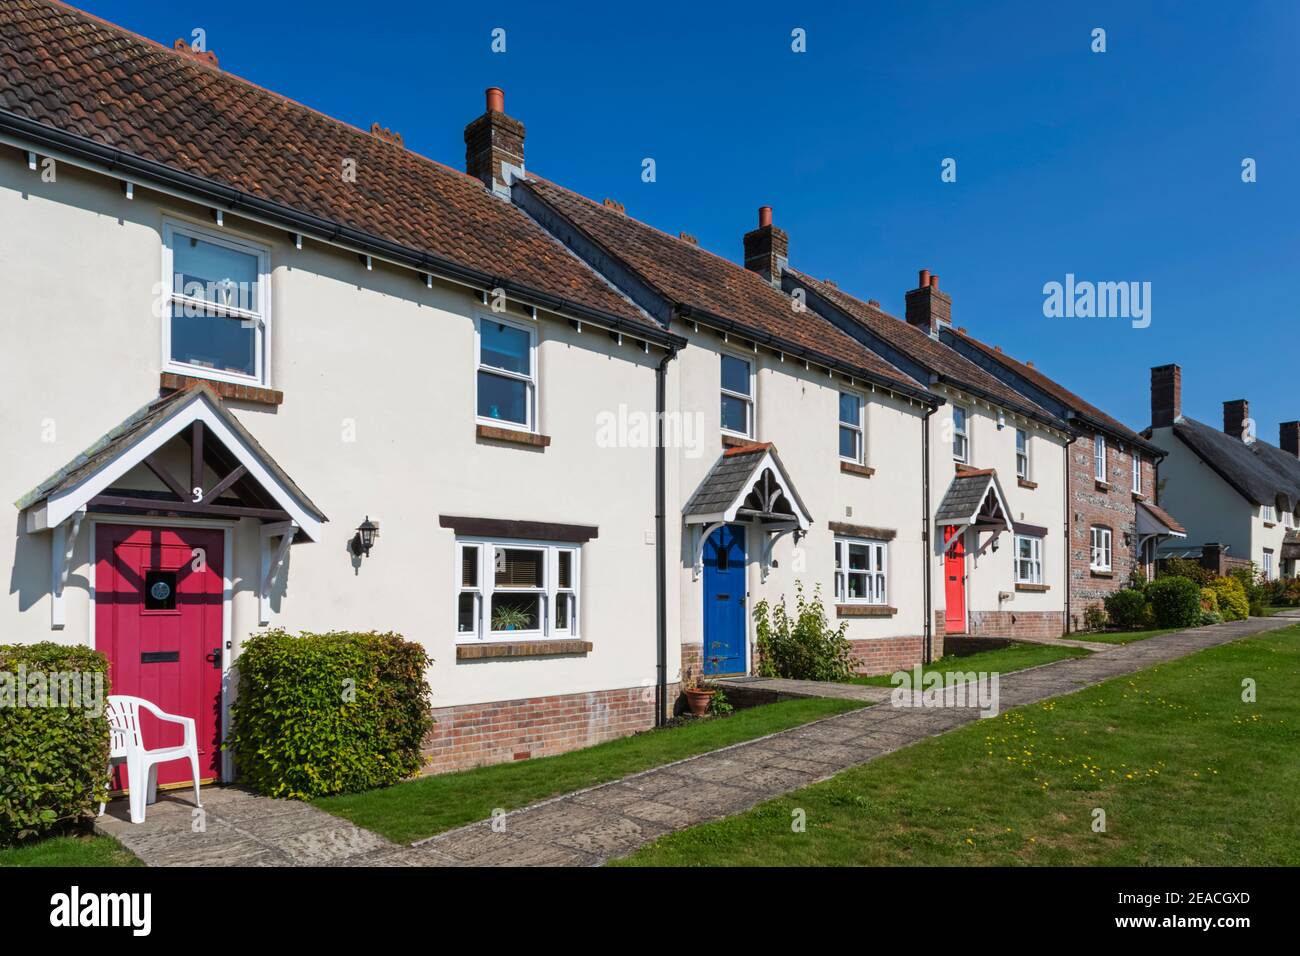 England, Dorset, Tolpuddle, Row of Houses with Colourful Doors Stock Photo